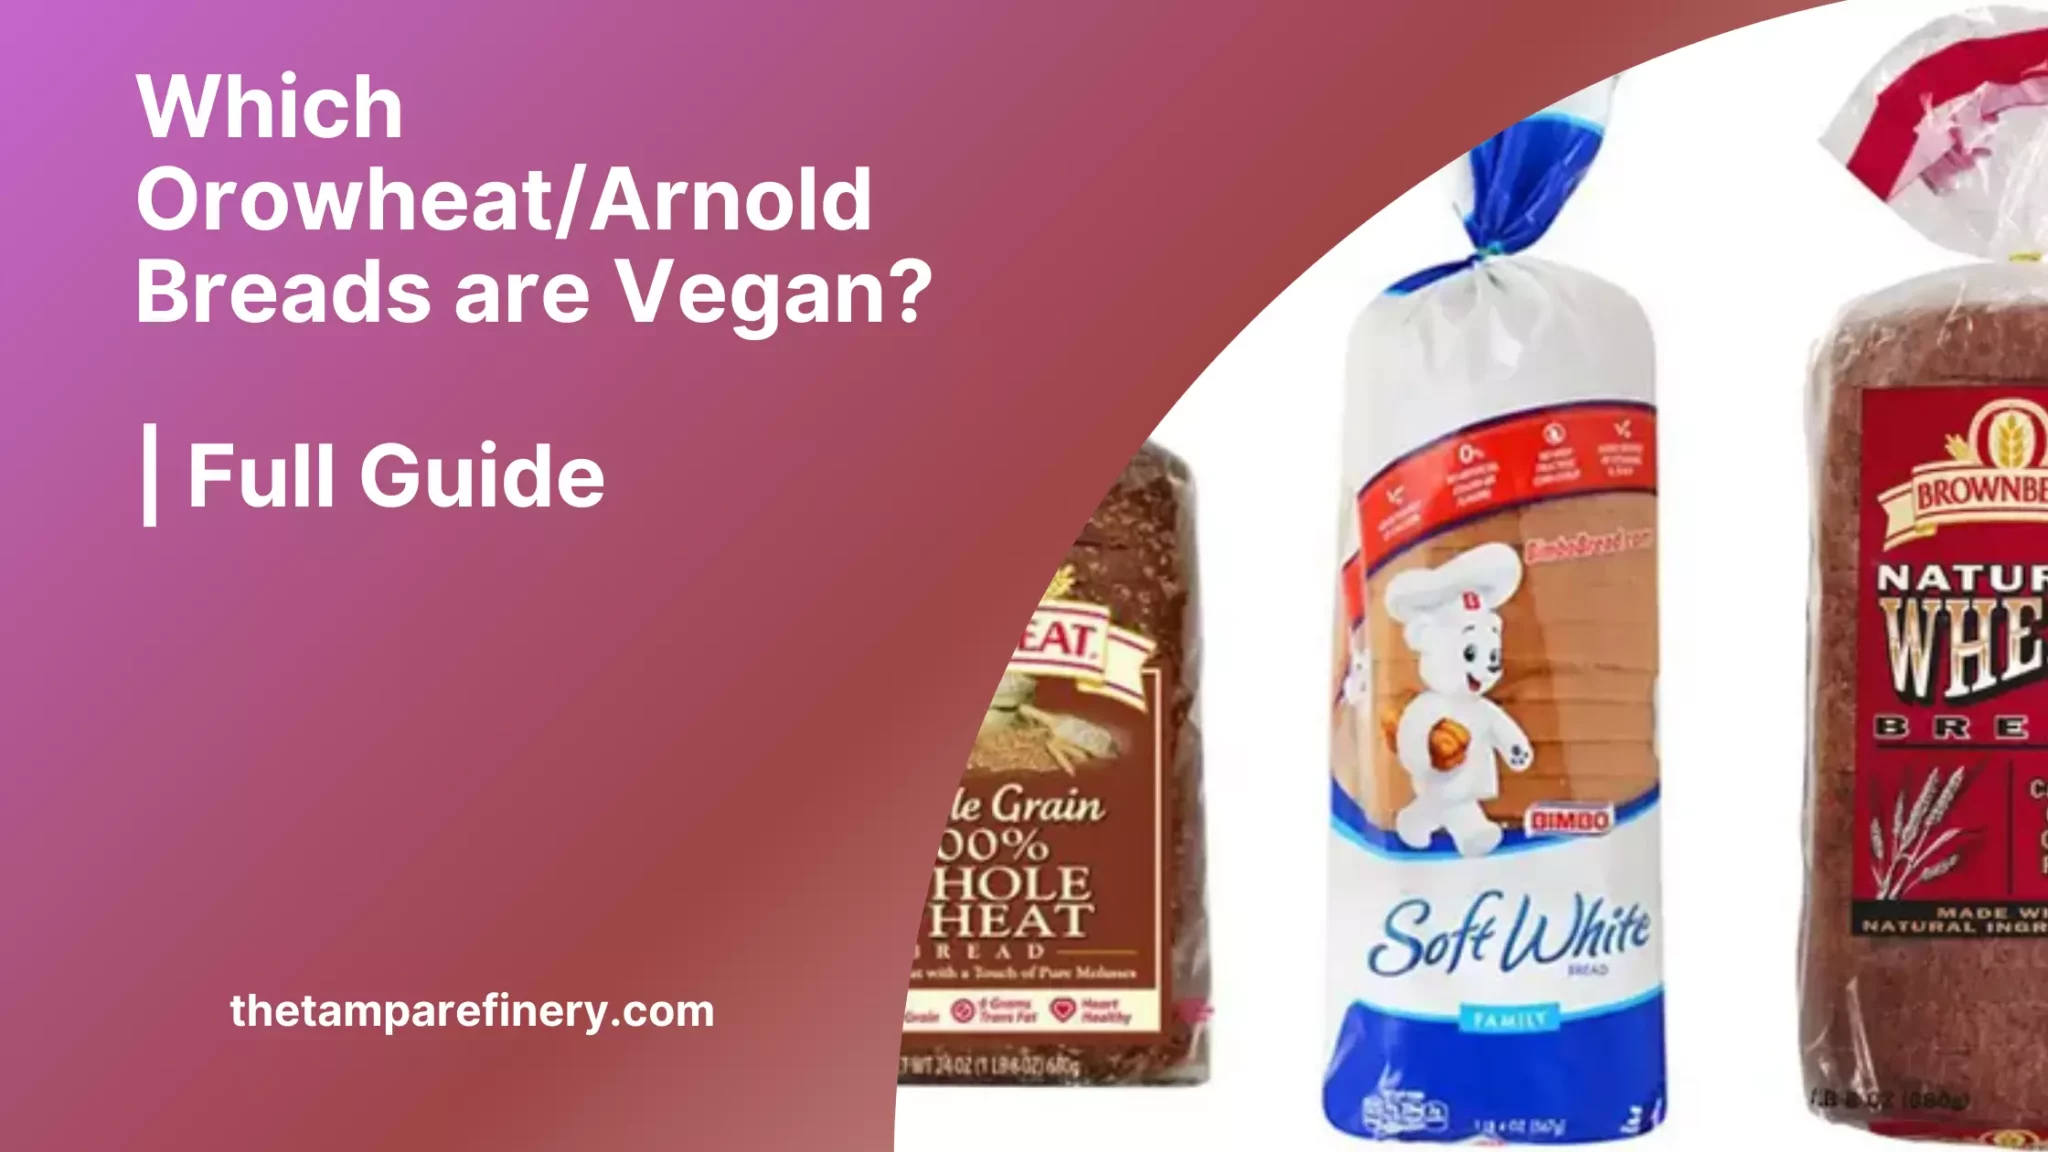 Which Orowheat and Arnold Breads are Vegan